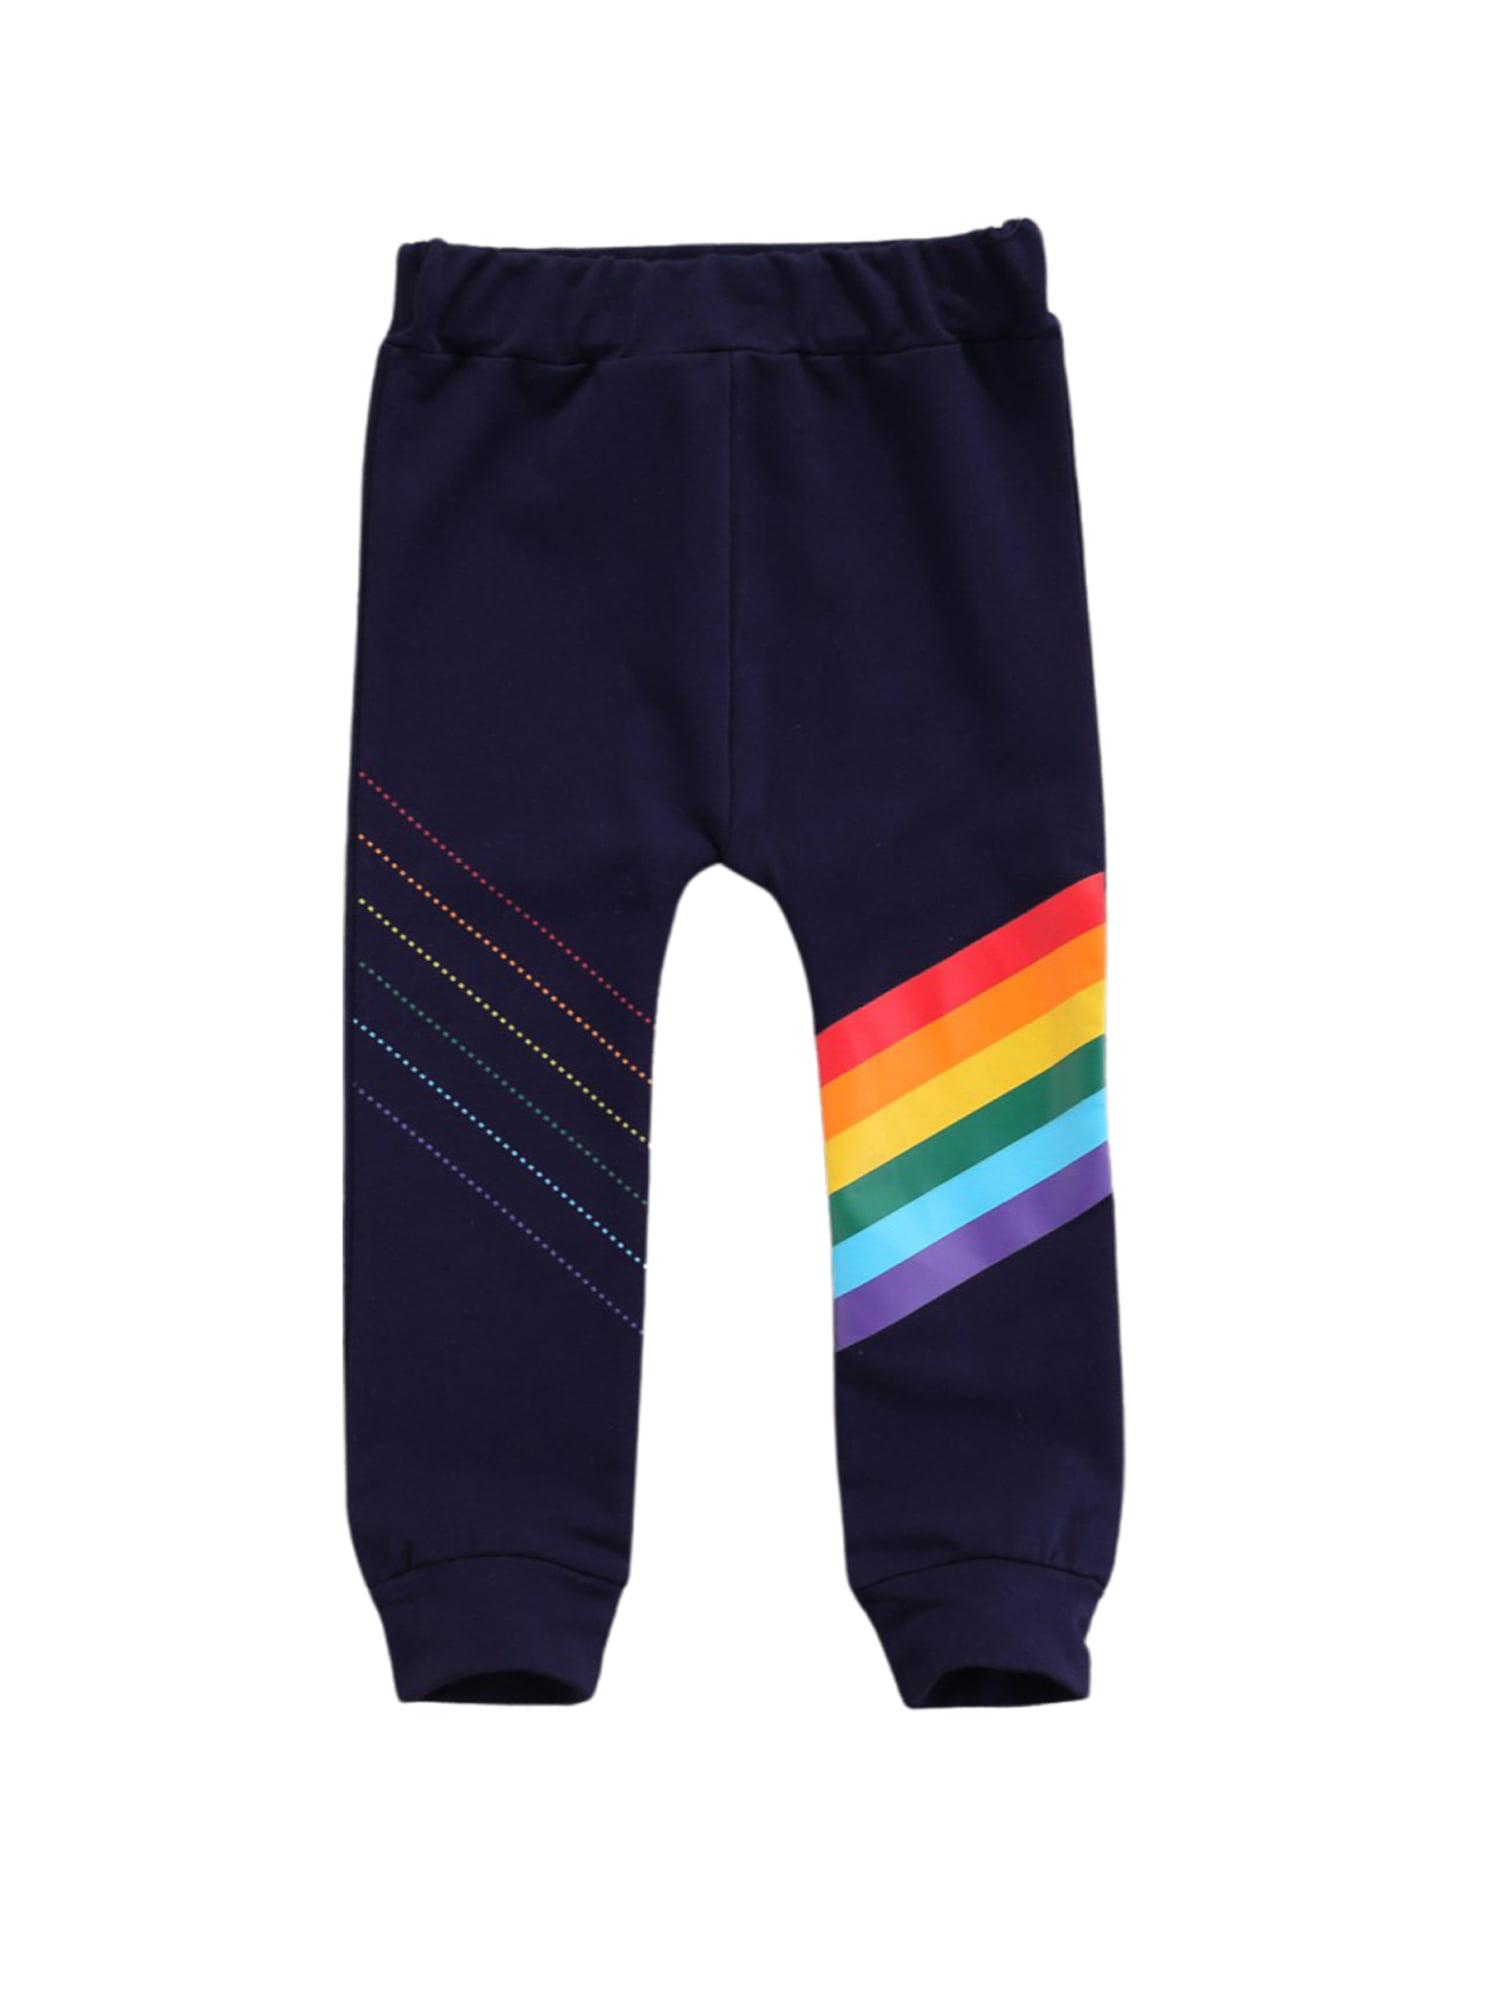 Kids Toddler Baby Boy Girl Striped Rainbow Jogger Pants Trousers with Elastic Waistband 